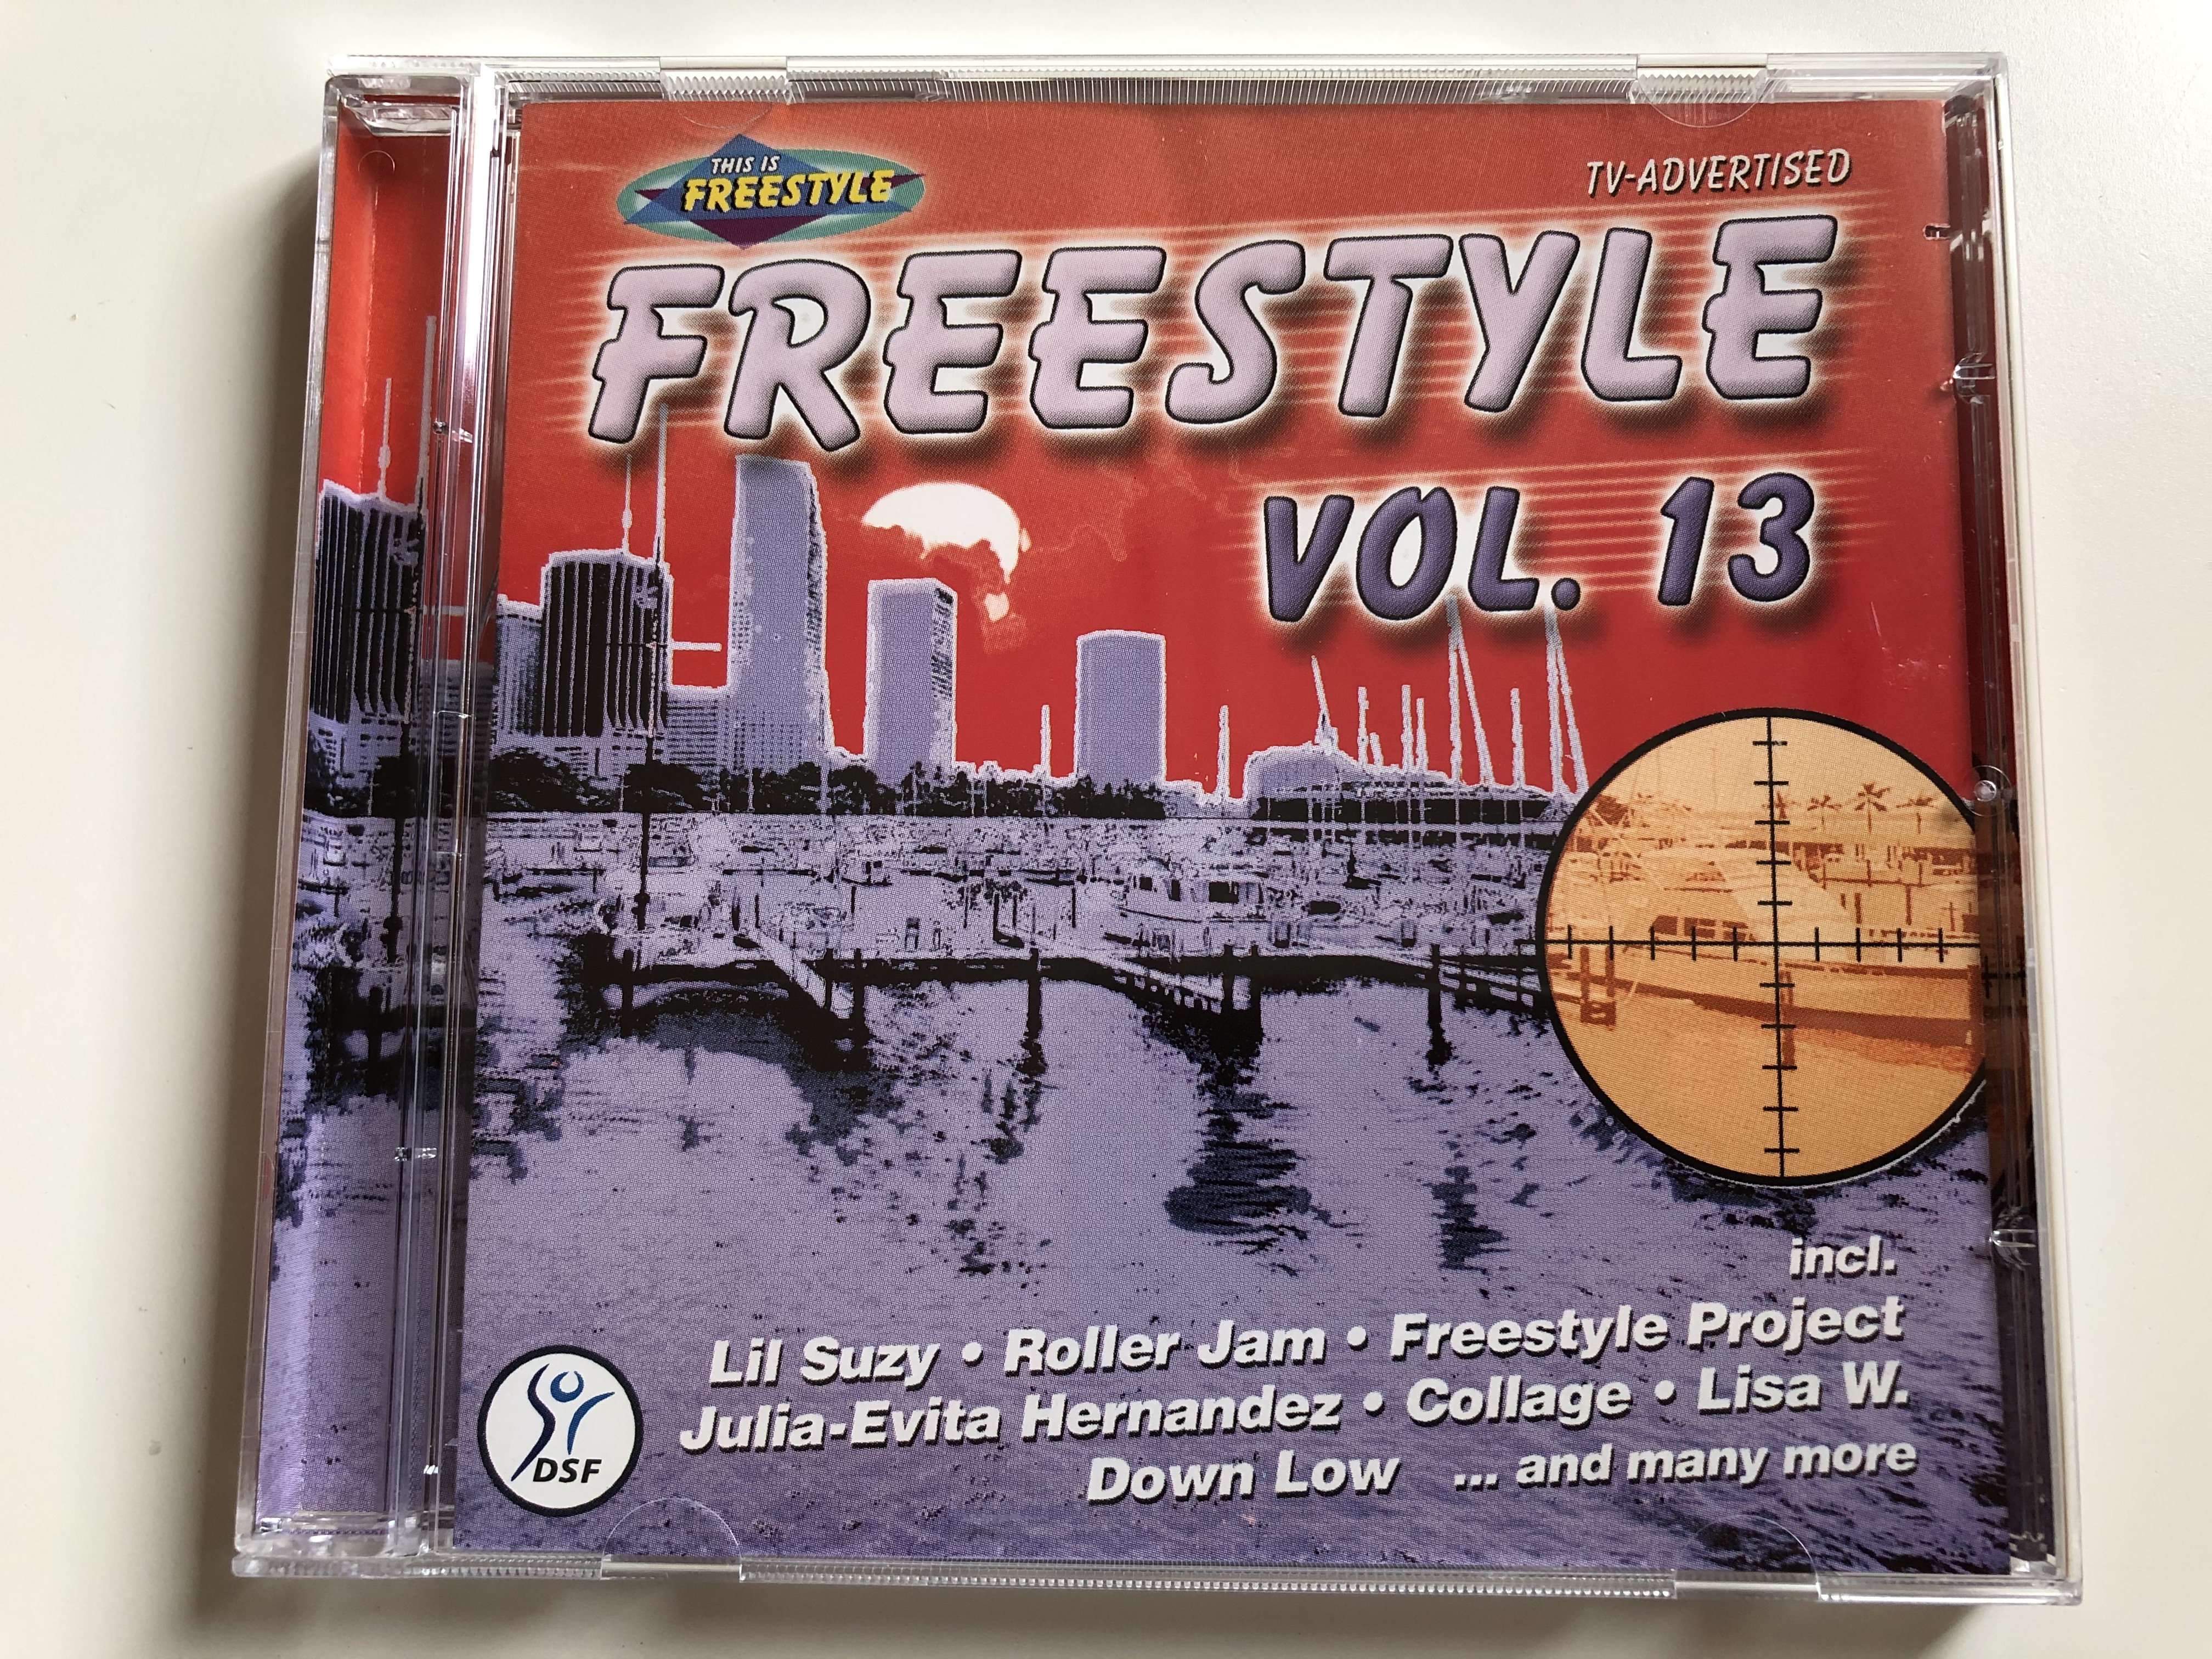 freestyle-vol.-13-incl.-lil-suzy-roller-jam-freestyle-project-julia-evita-hernandez-collage-lisa-w.-down-low-and-many-more-zyx-music-audio-cd-2001-zyx-55216-2-1-.jpg